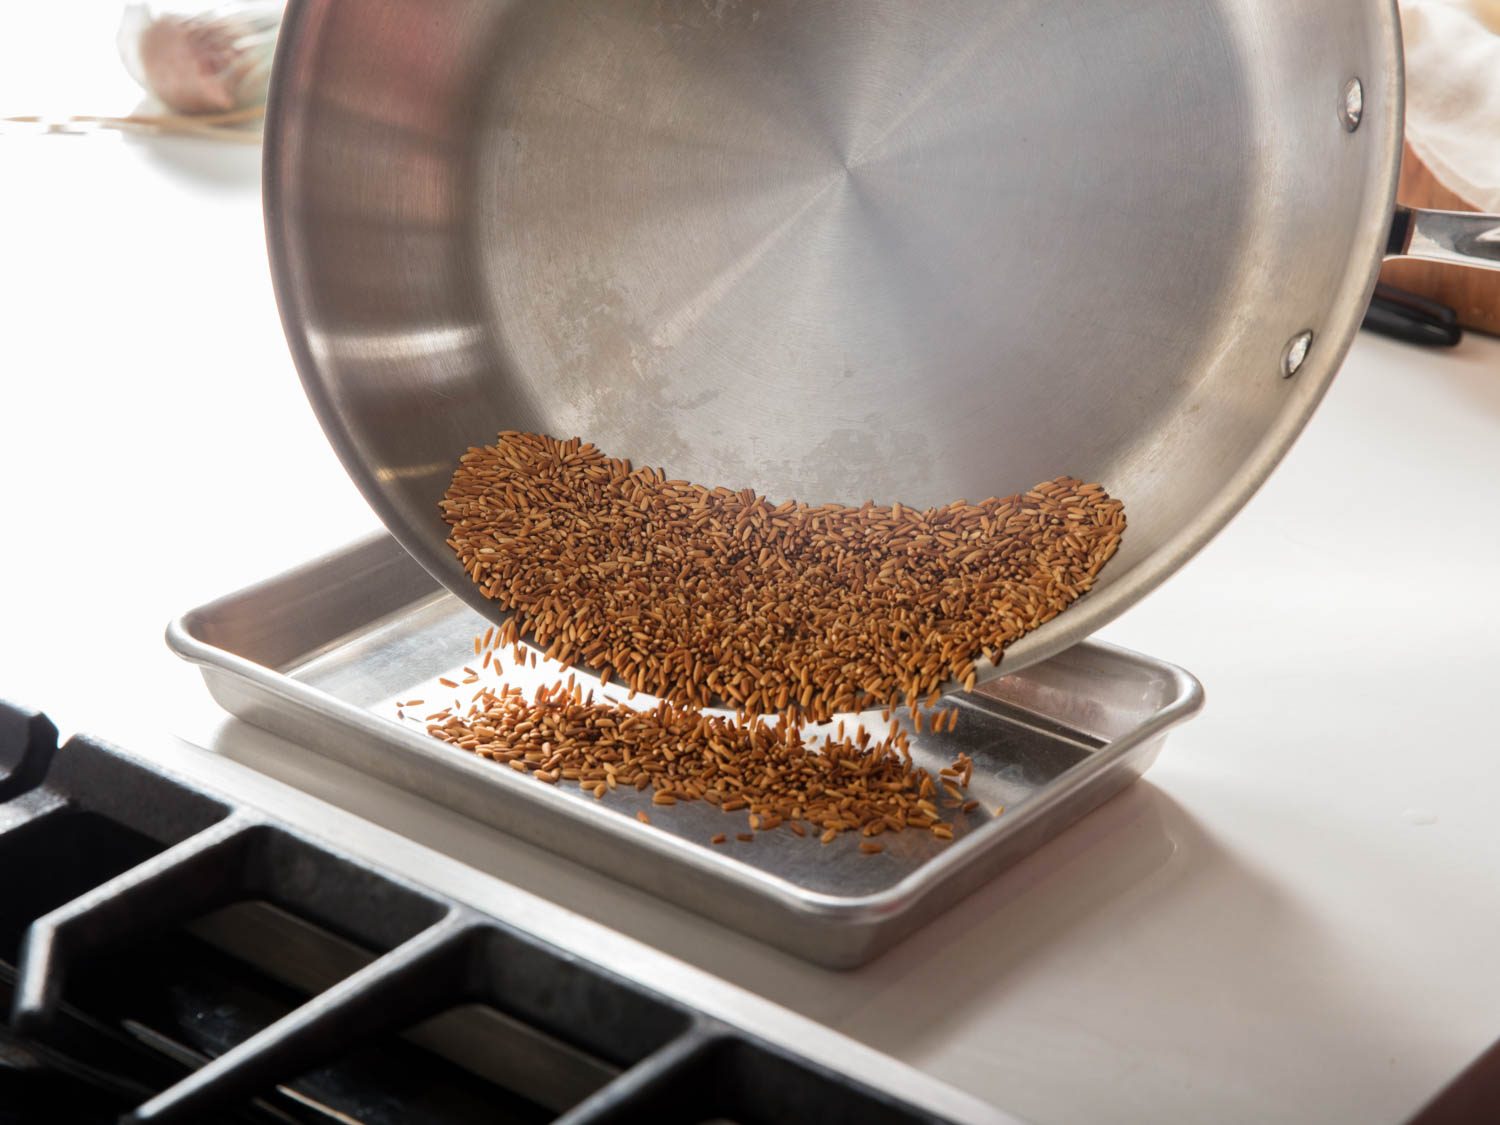 Transferring toasted rice from a skillet to a small baking sheet to cool.